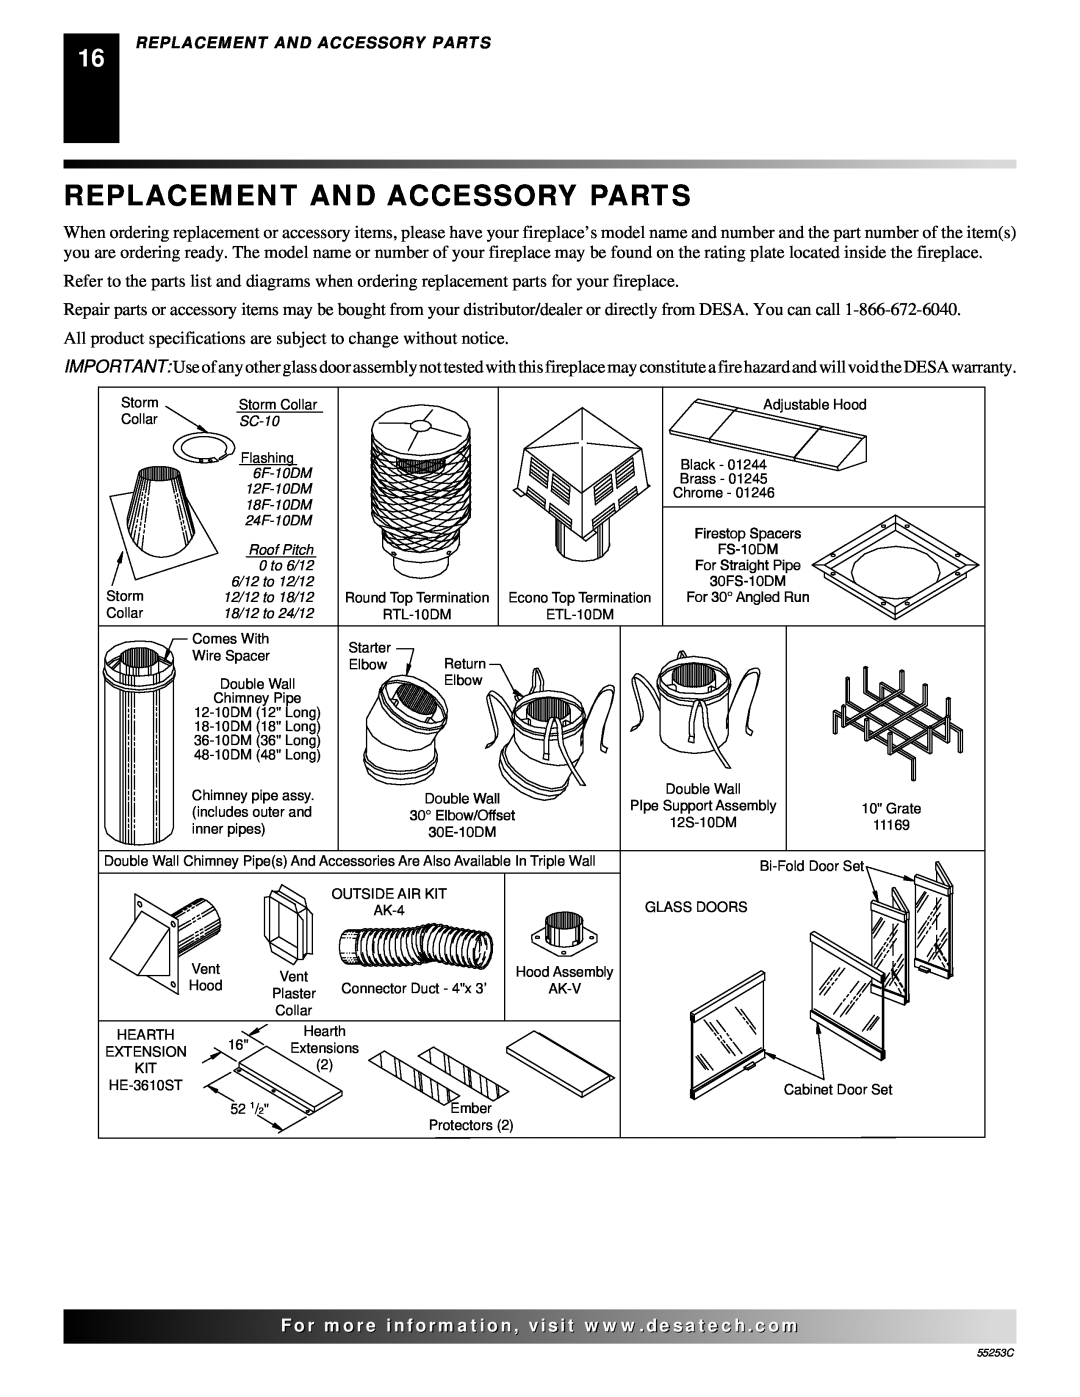 Desa V3610ST manual Replacement And Accessory Parts 